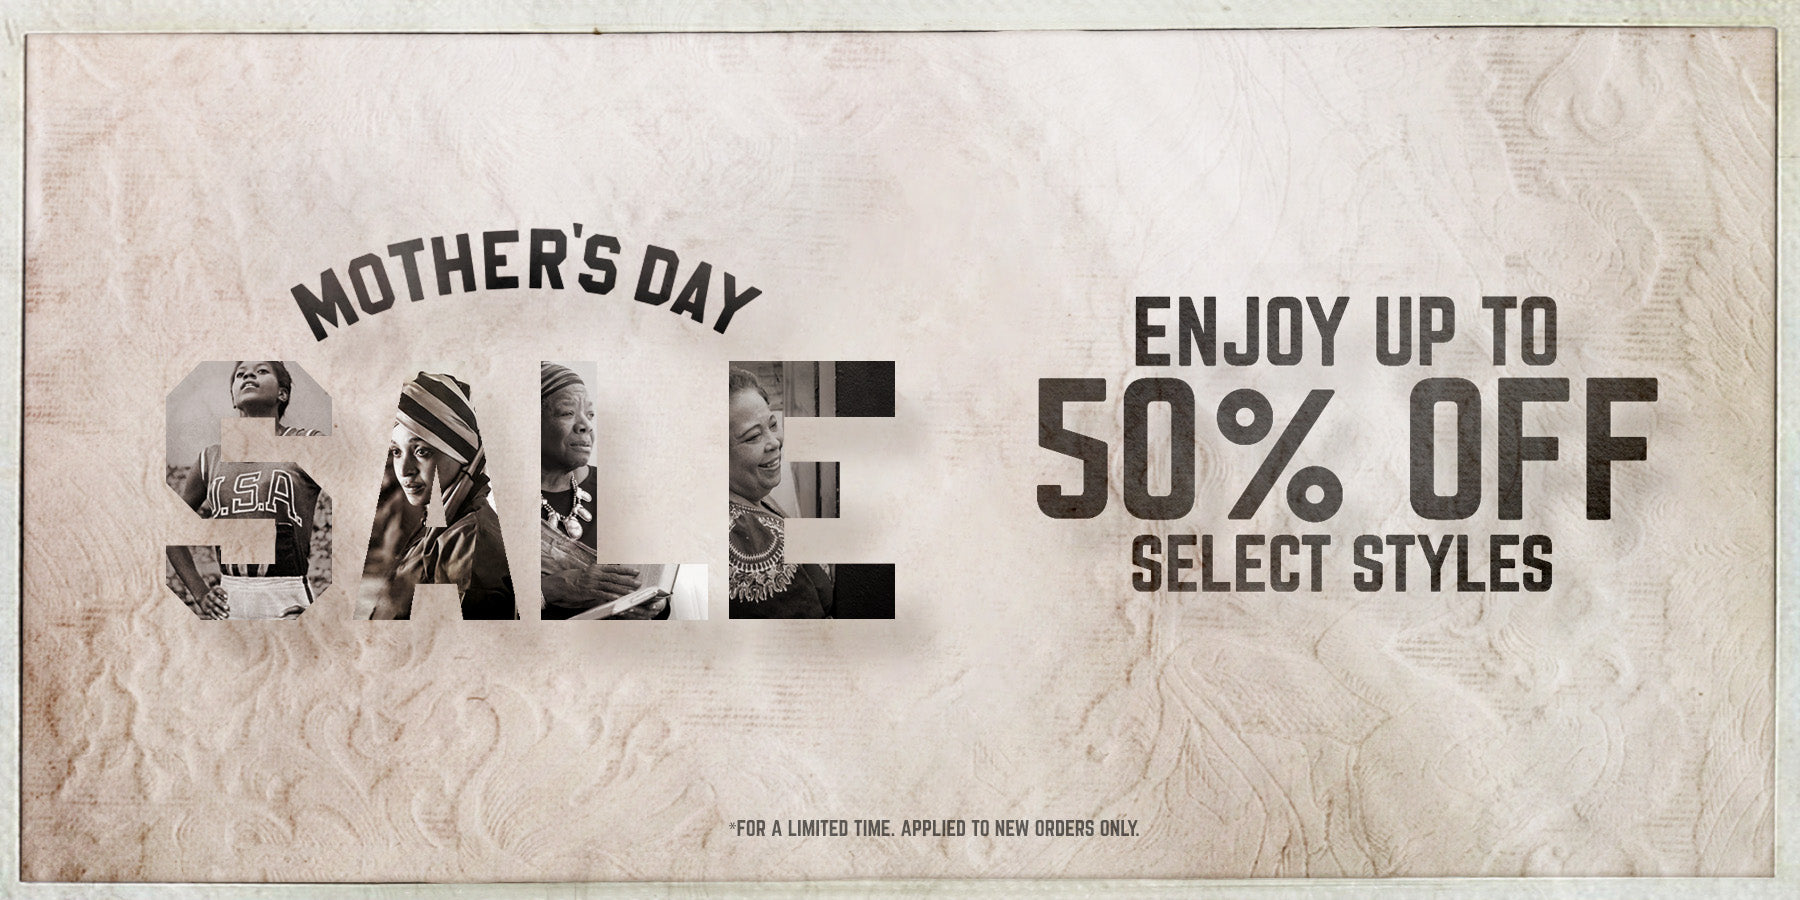 Promotional Mother's Day banner with '50% OFF' offer and images of women within letters.